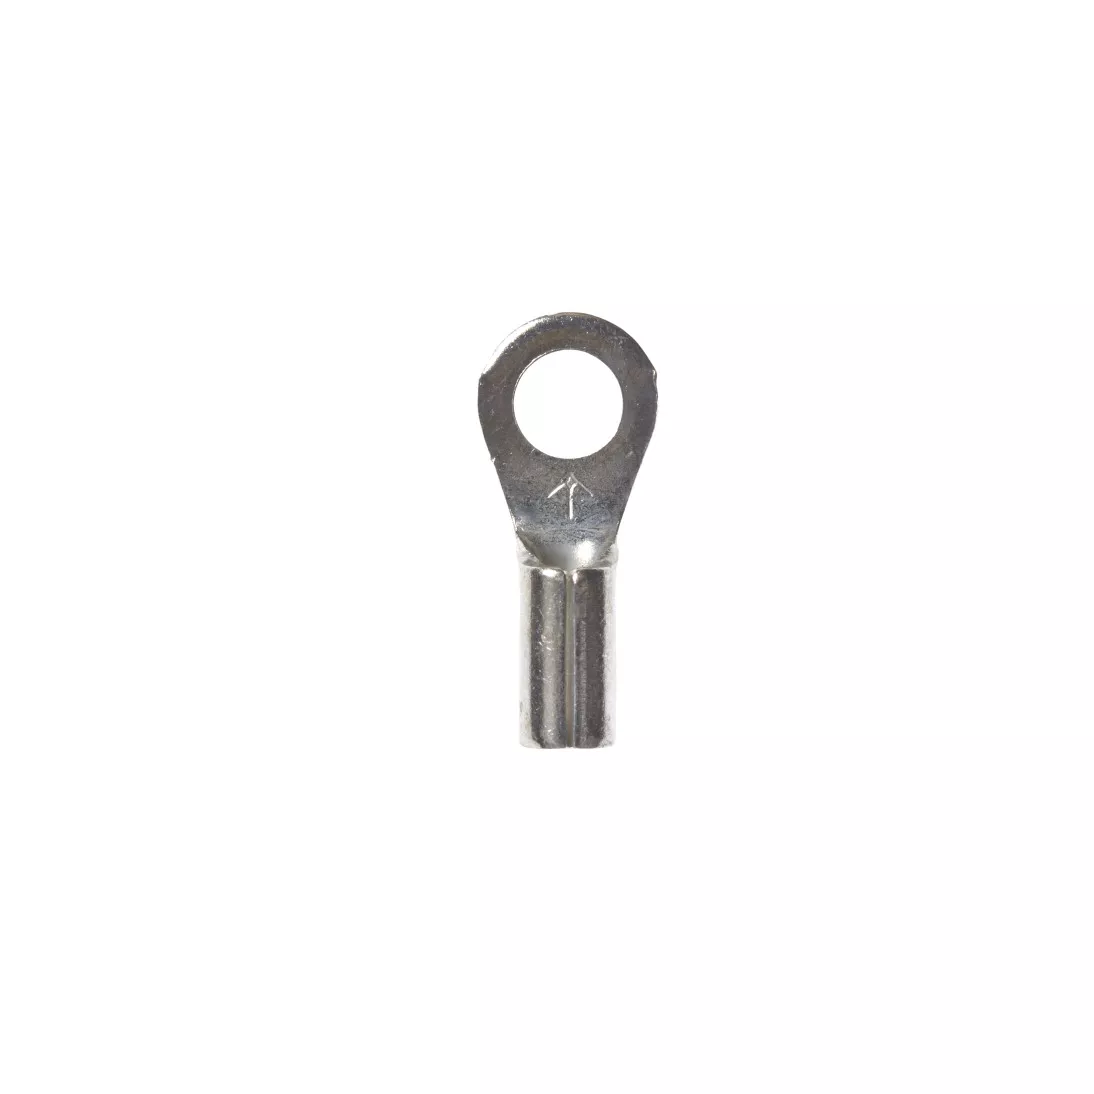 3M™ Scotchlok™ Ring Tongue, Non-Insulated Butted Seam MU18-6R/SK, Stud
Size 6, 1000/Case